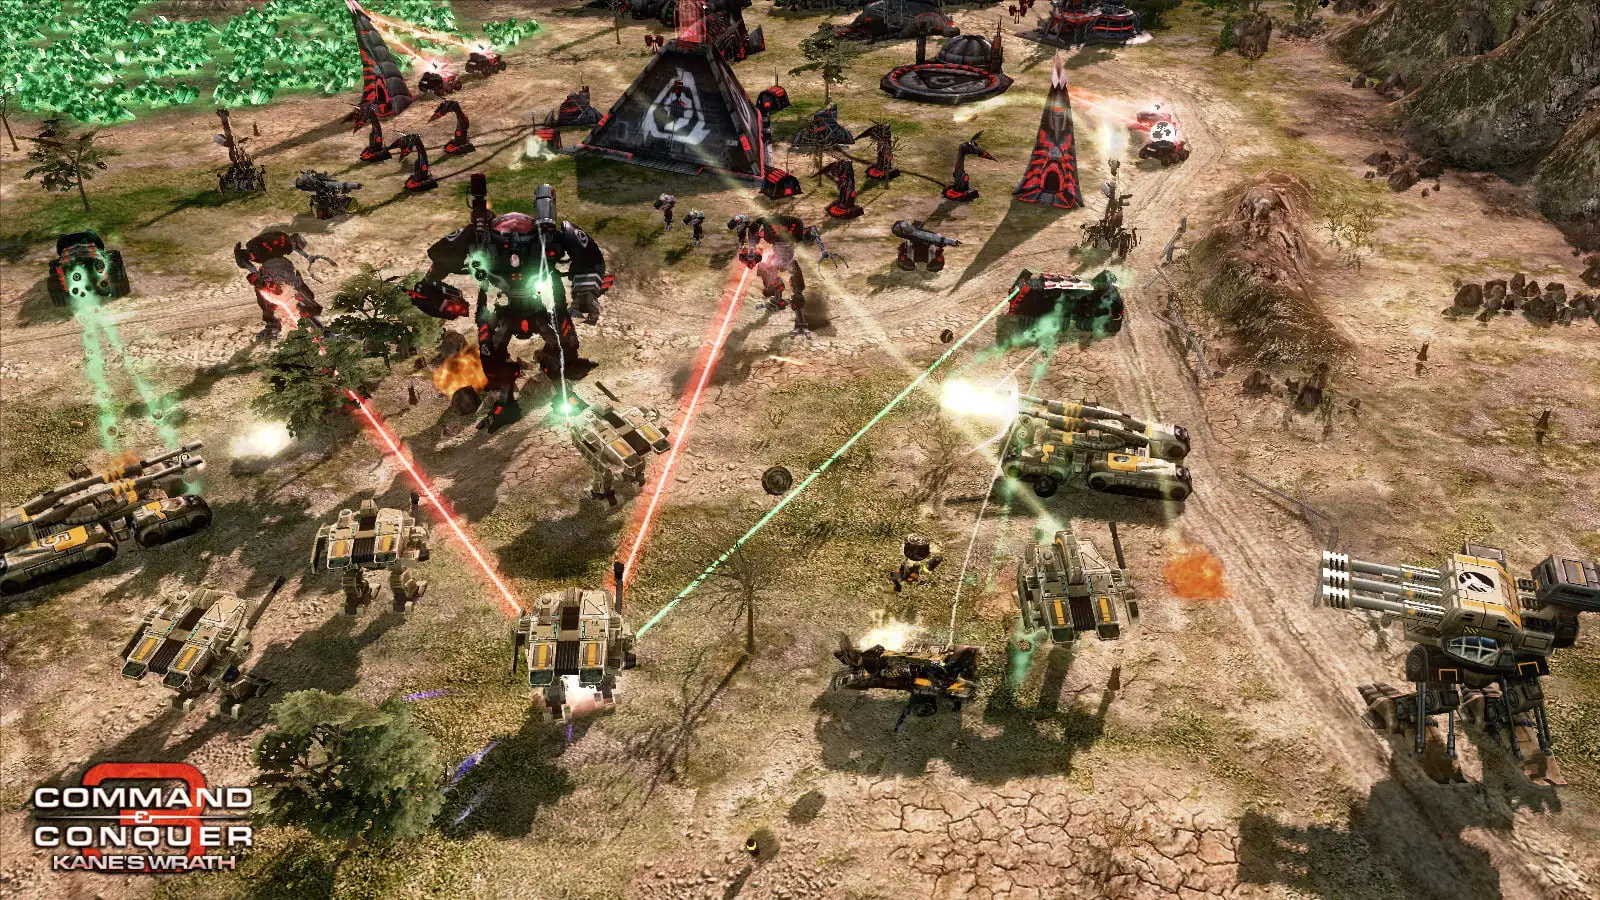 command-and-conquer-3-kanes-wrath-screenshot-9